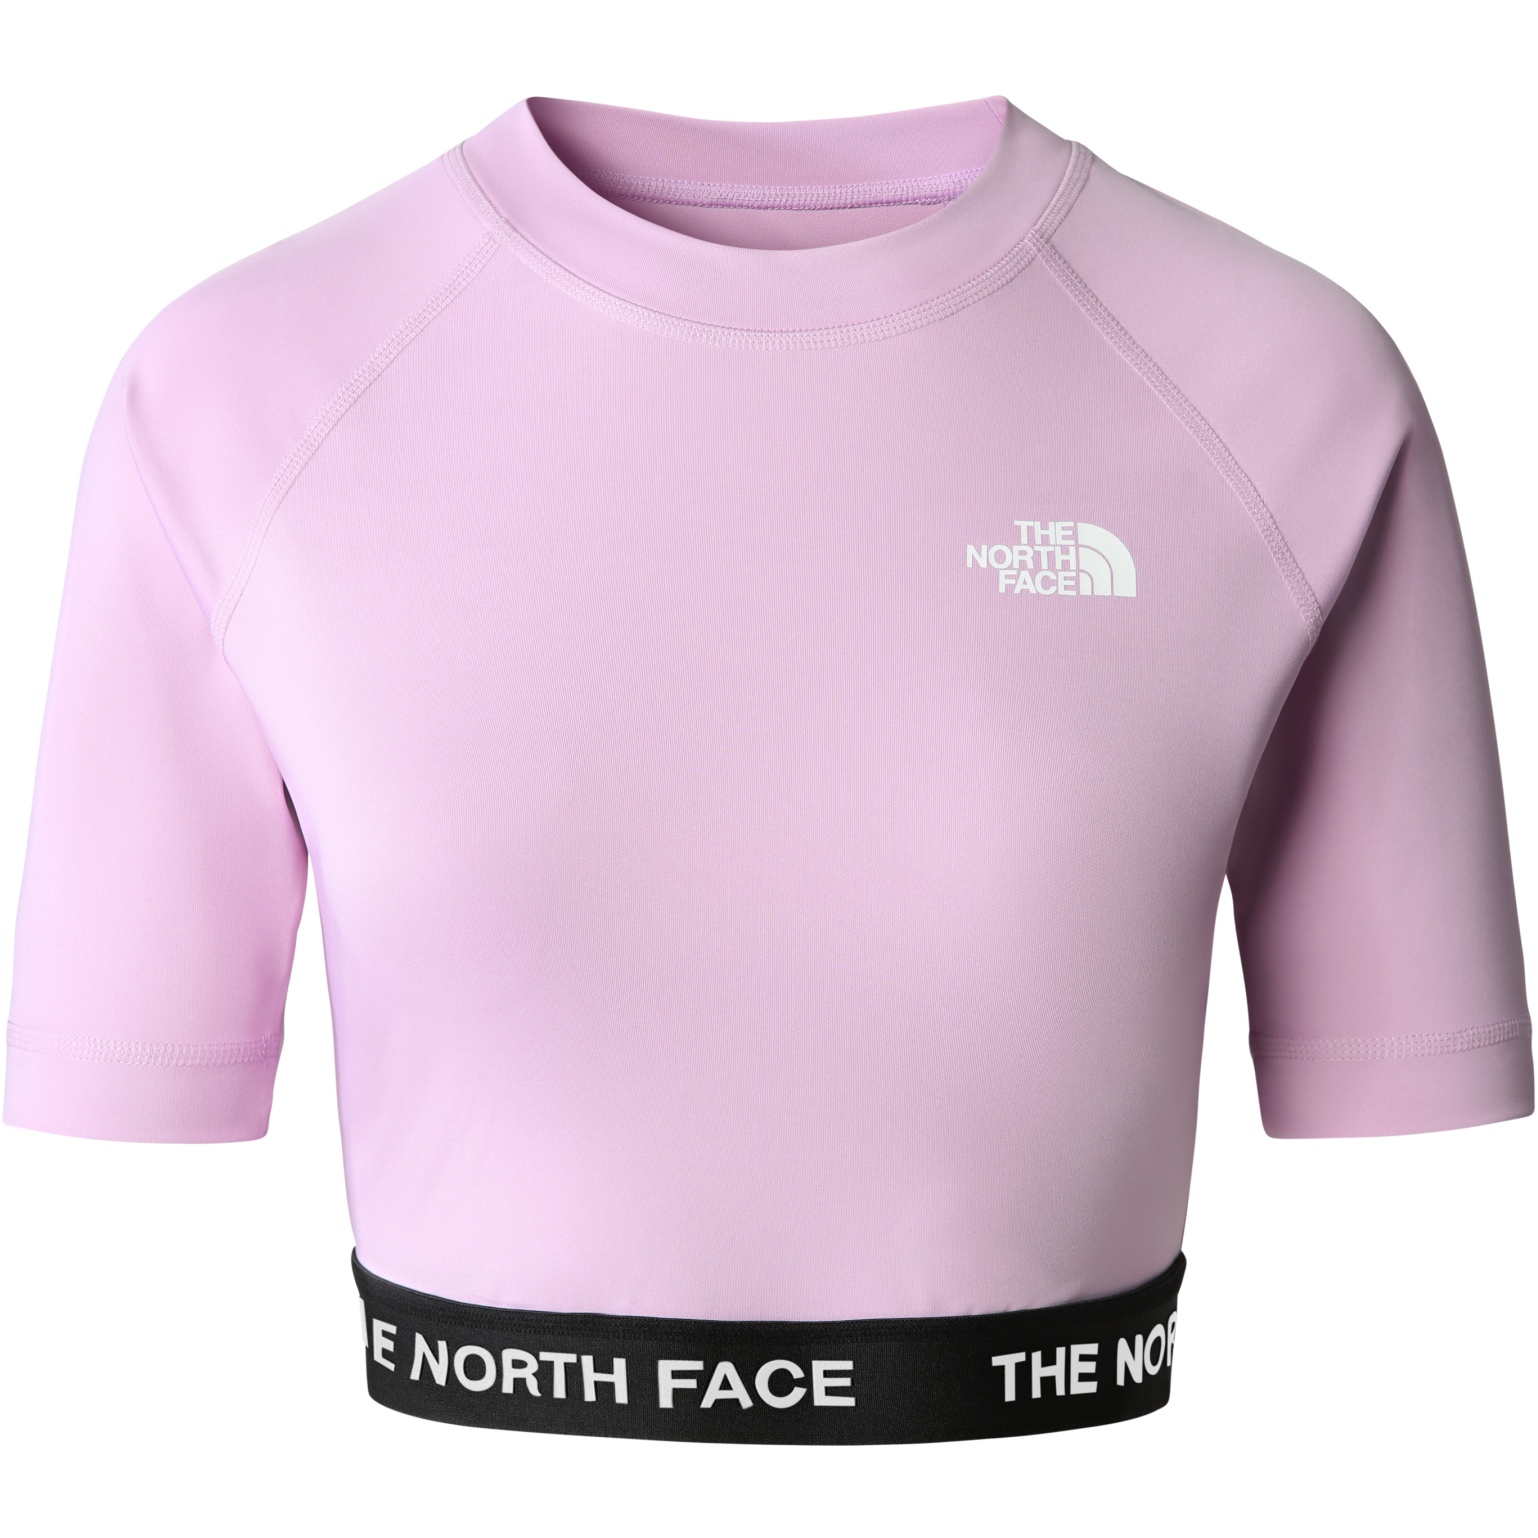 Productfoto van The North Face Performance Crop Top Dames - Lupine